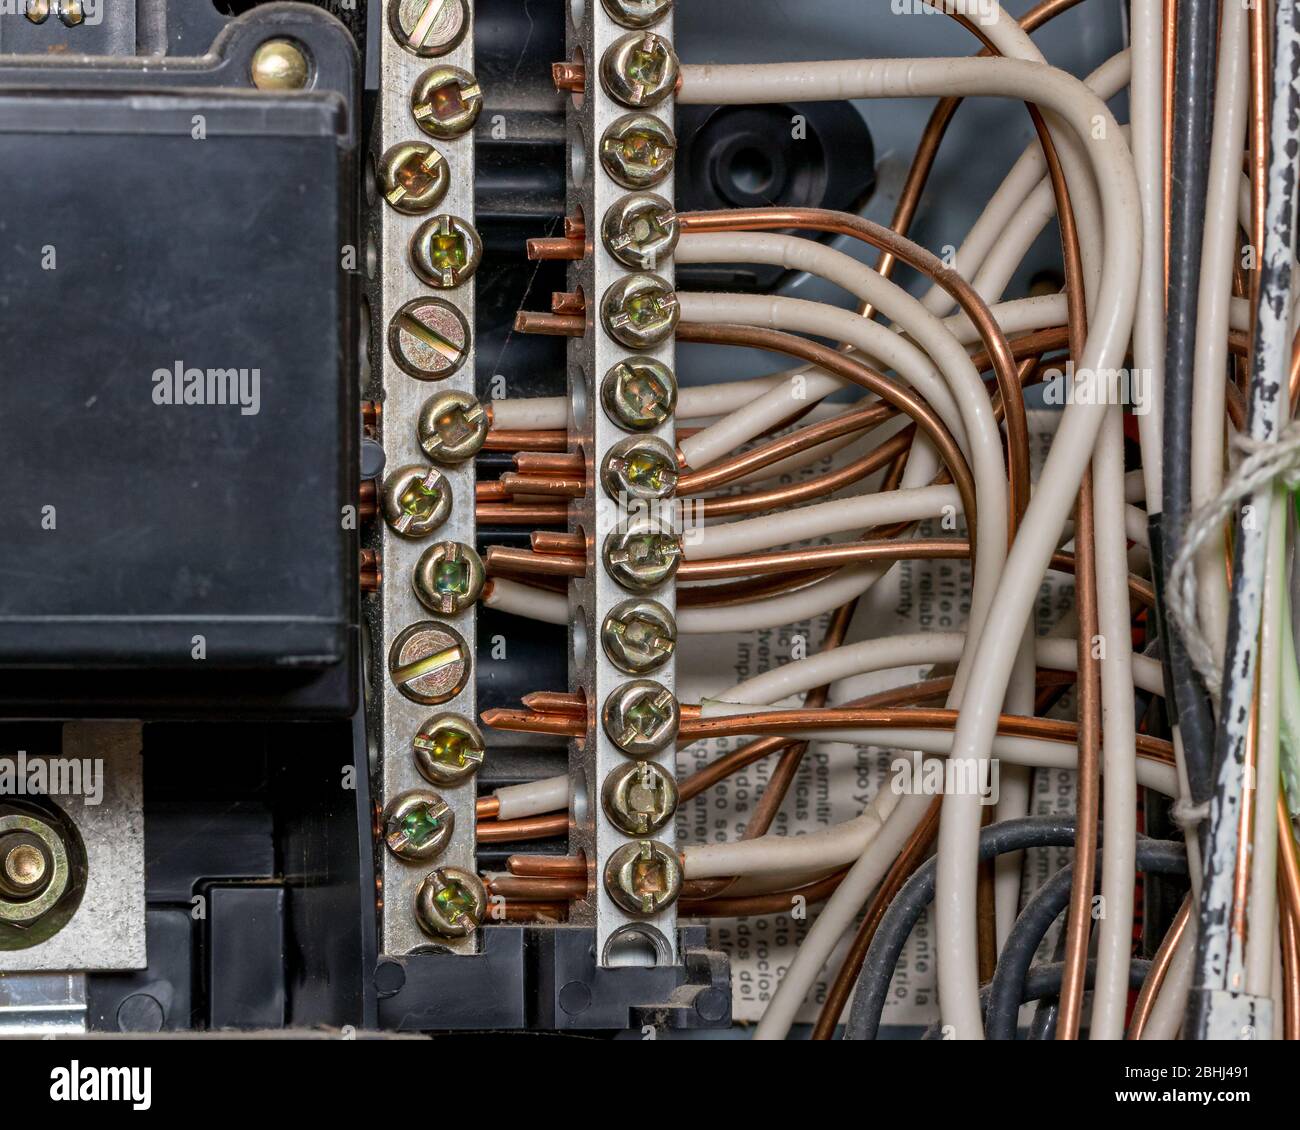 Wiring In Electrical Circuit Breaker Box Panel With Bus Bar And Copper Wires Concept Of Home Maintenance Repair Remodeling Stock Photo Alamy